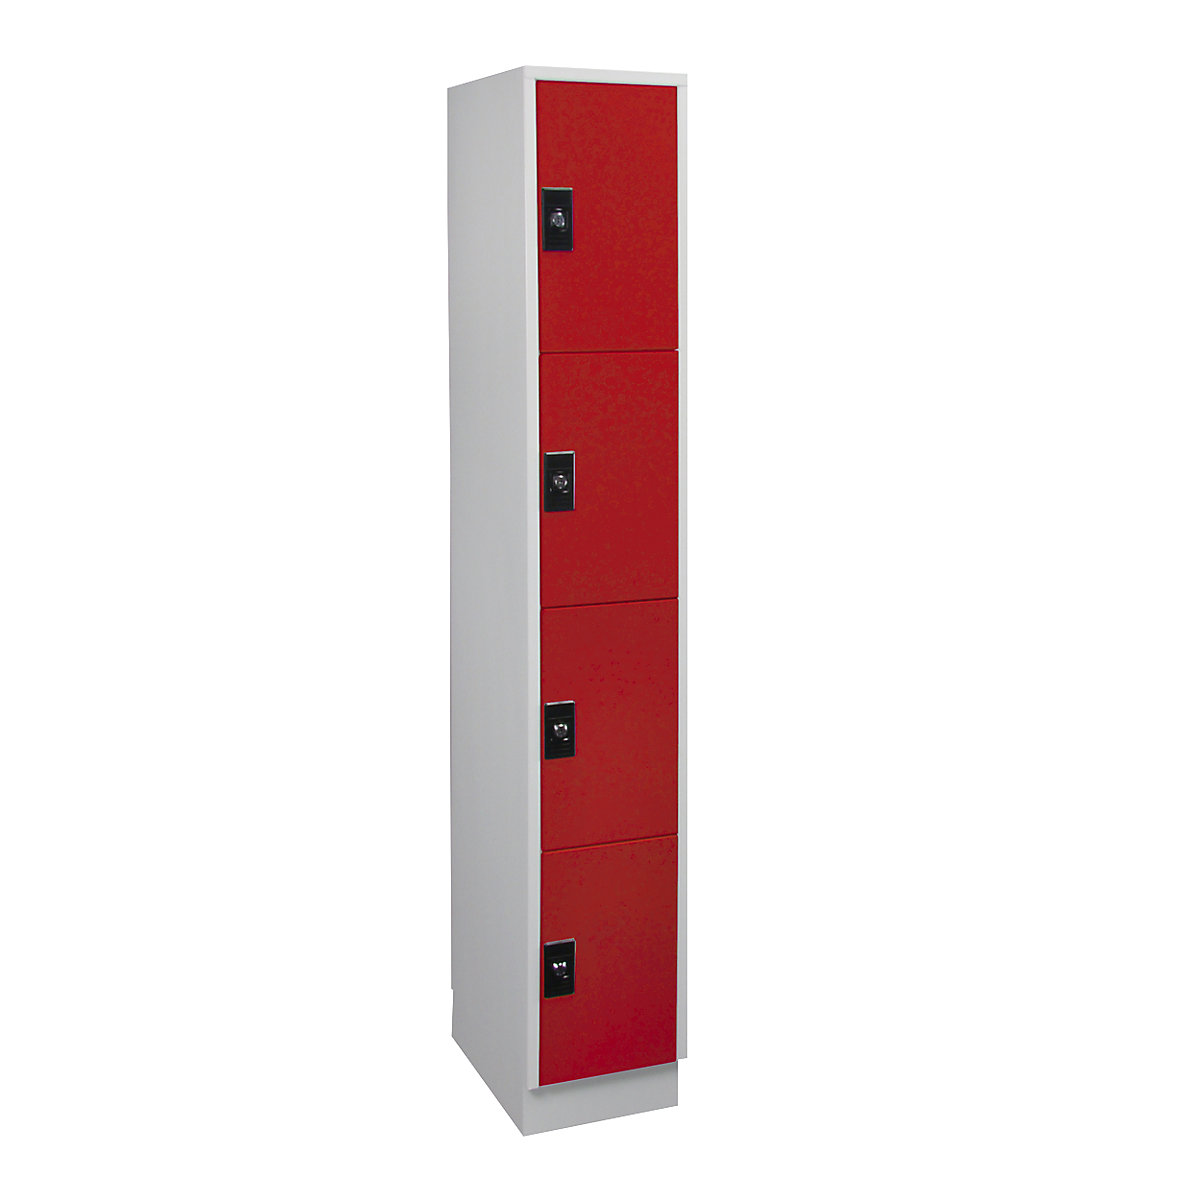 Compartment locker – Wolf, 1 compartment, 4 shelf compartments each, light grey / flame red-9